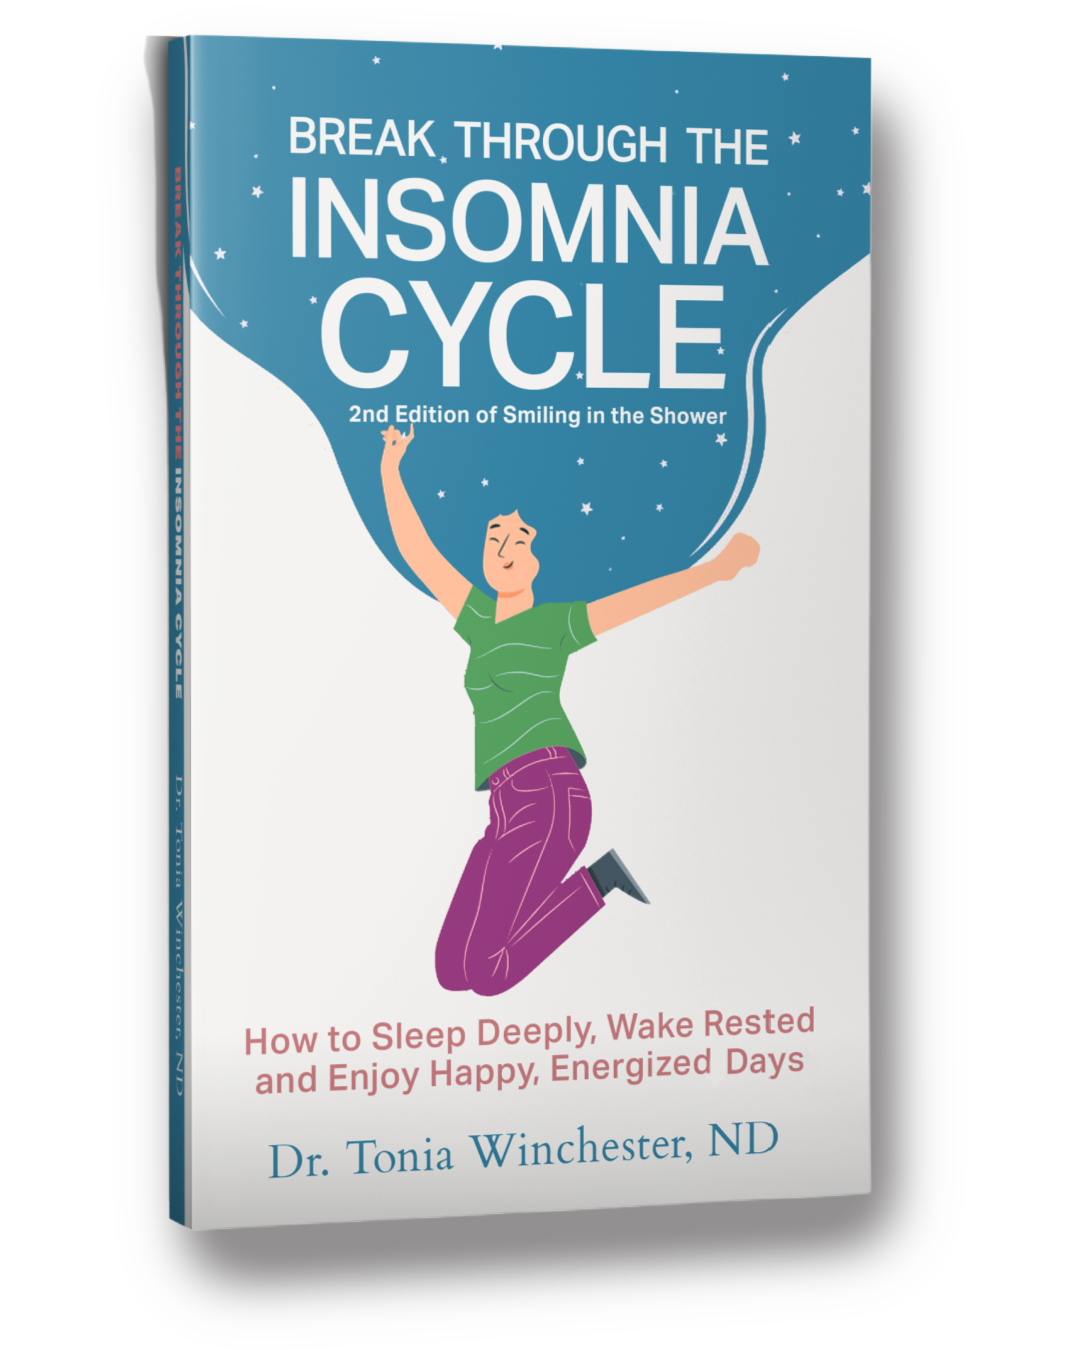 breakthrough the insomnia cycle